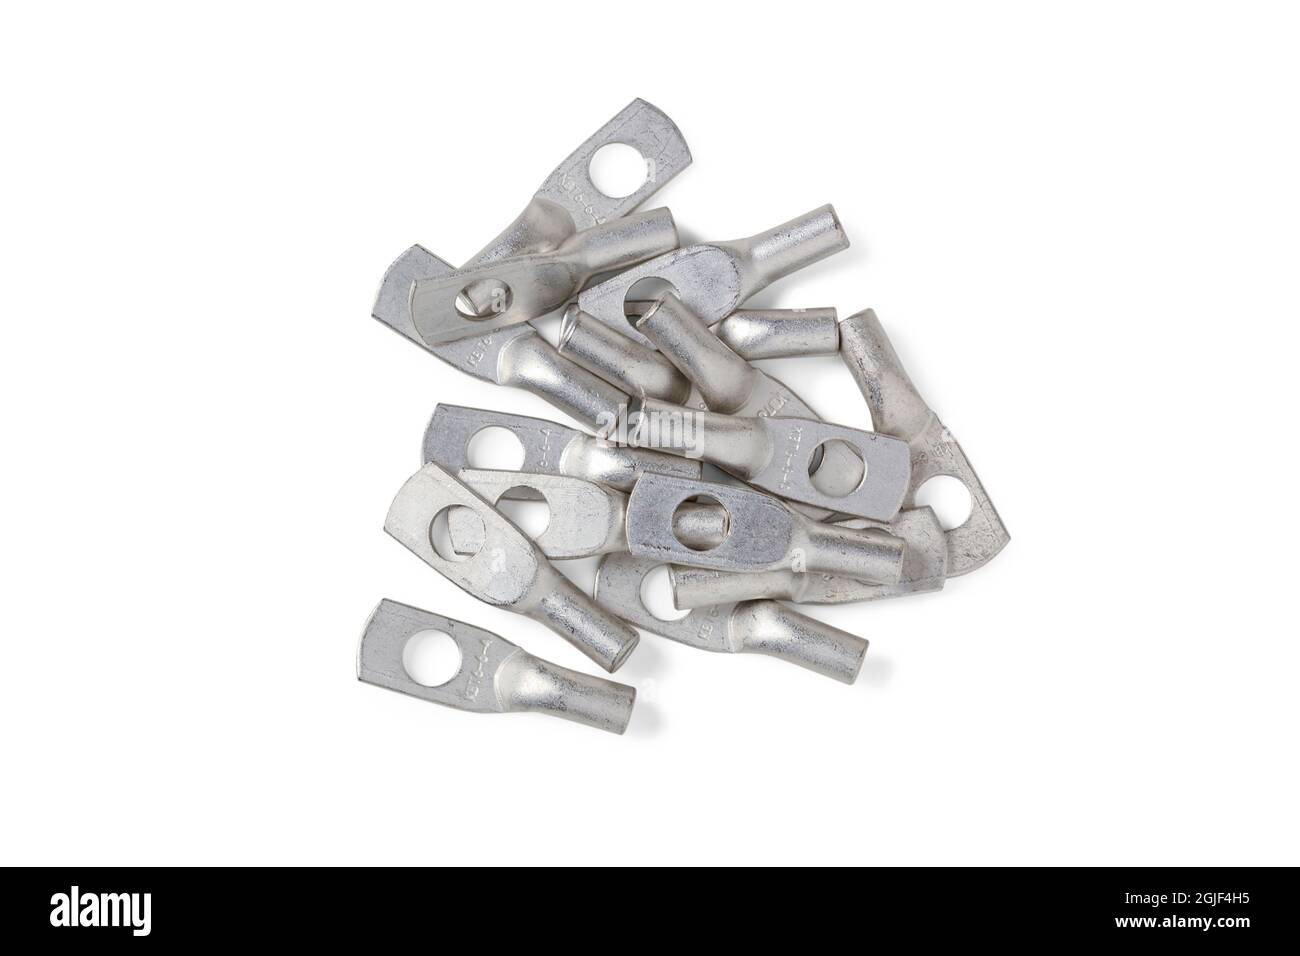 Handful of tinned copper electrical lugs for wiring electrical circuits isolated on white Stock Photo